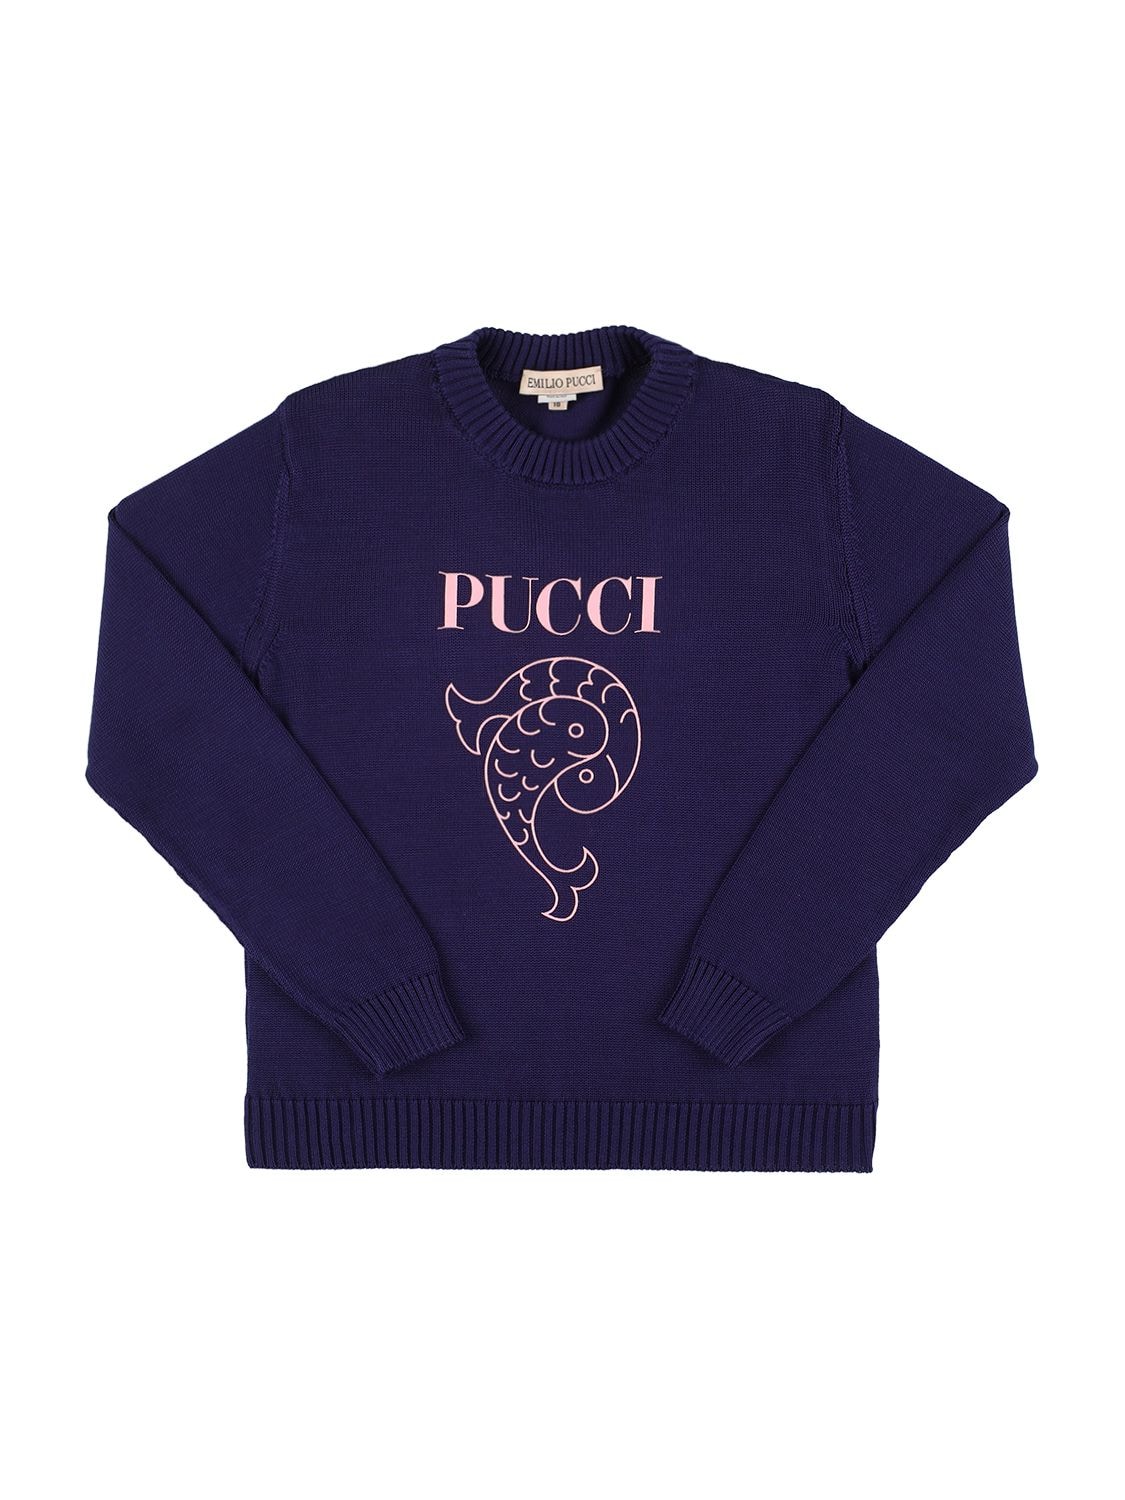 Pucci Kids' Rubberized Logo Cotton Knit Sweater In Navy